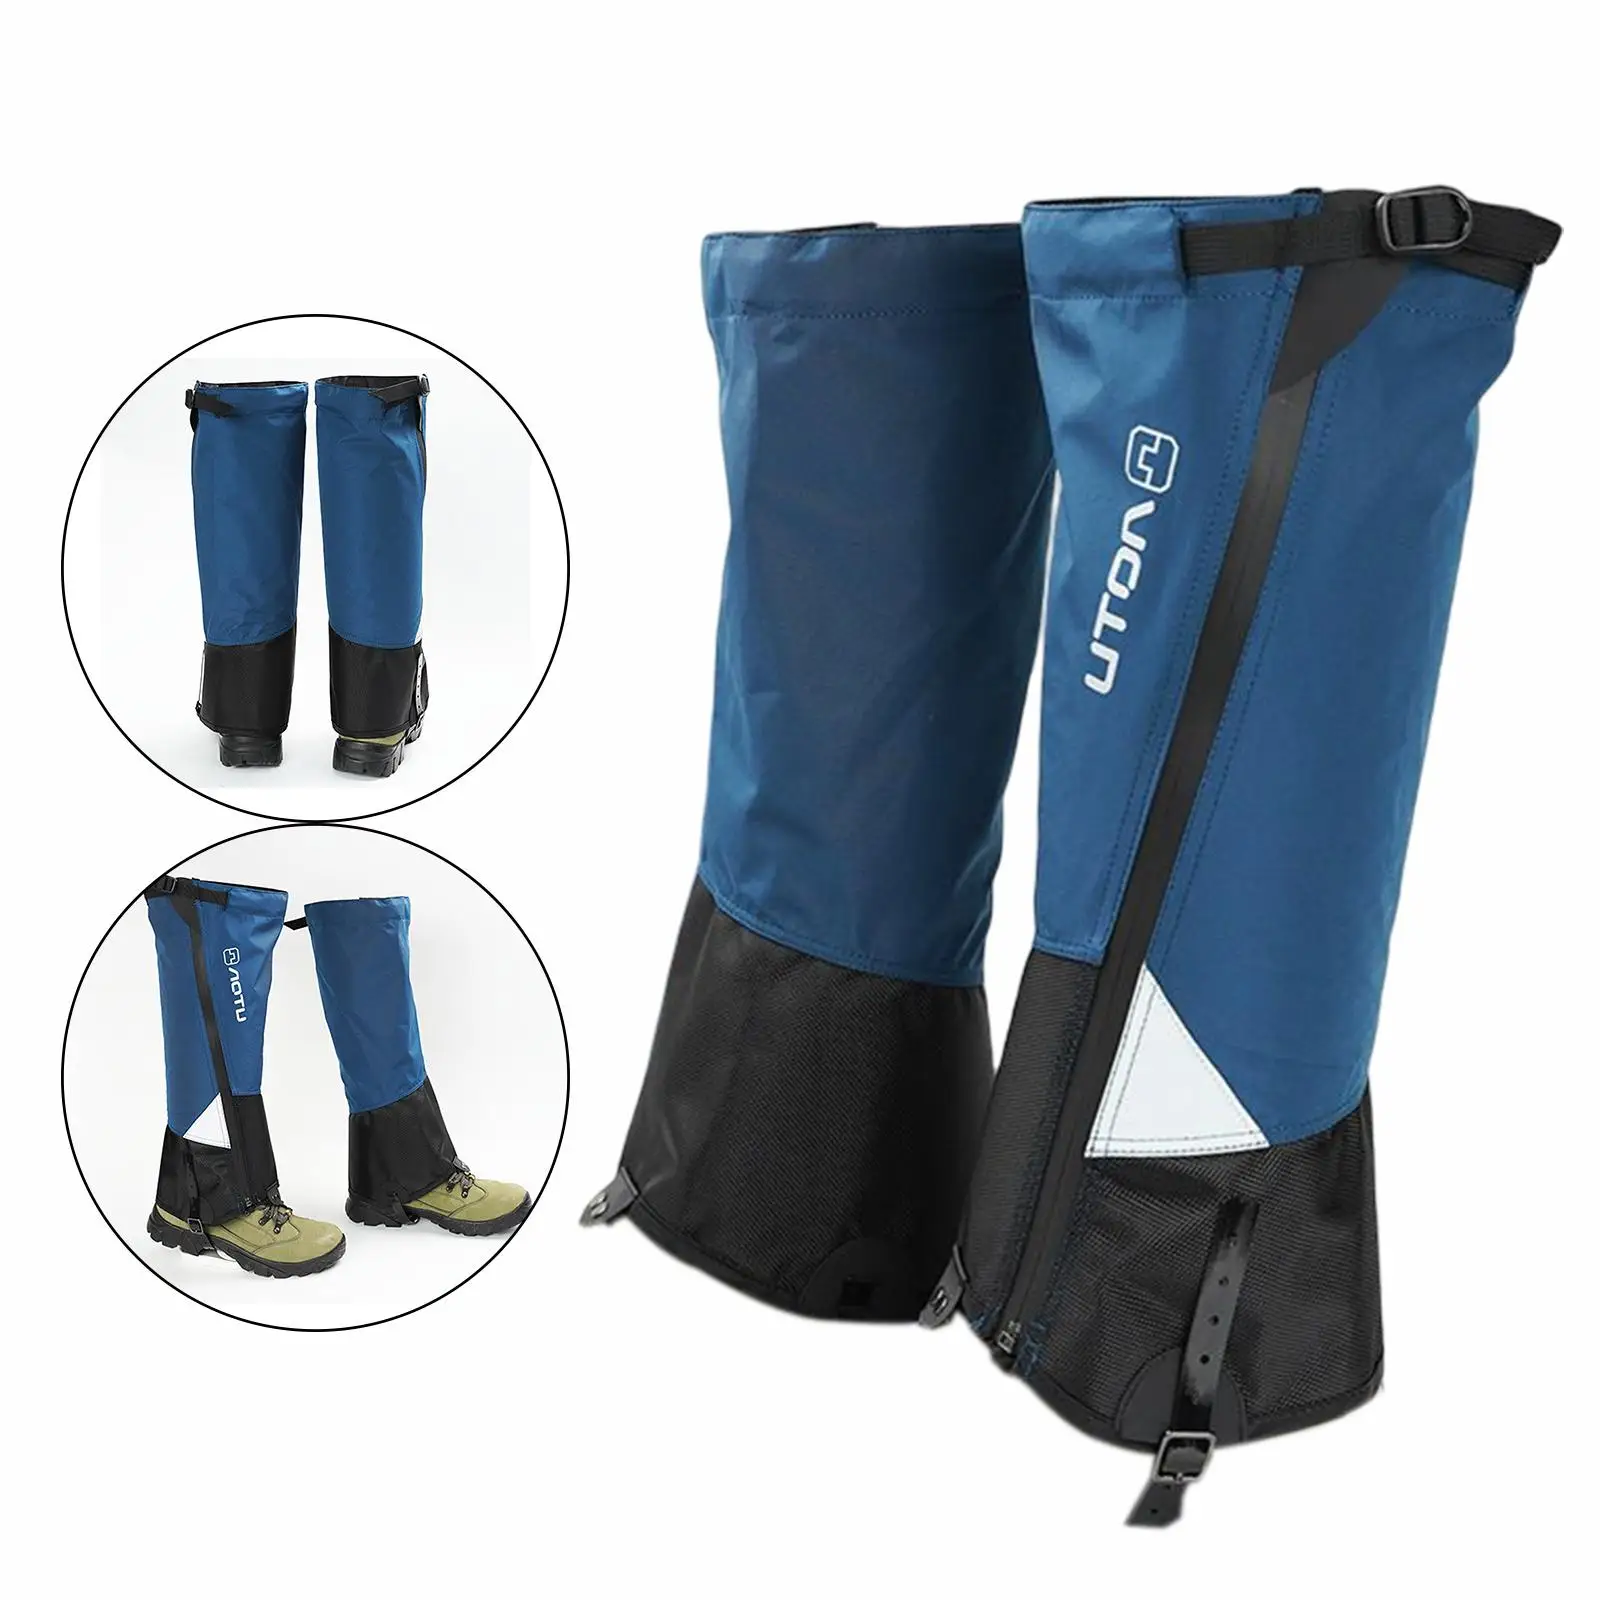 Adjustable Leg Gaiters Waterproof  Durable Cover for Climbing Outdoor Sports